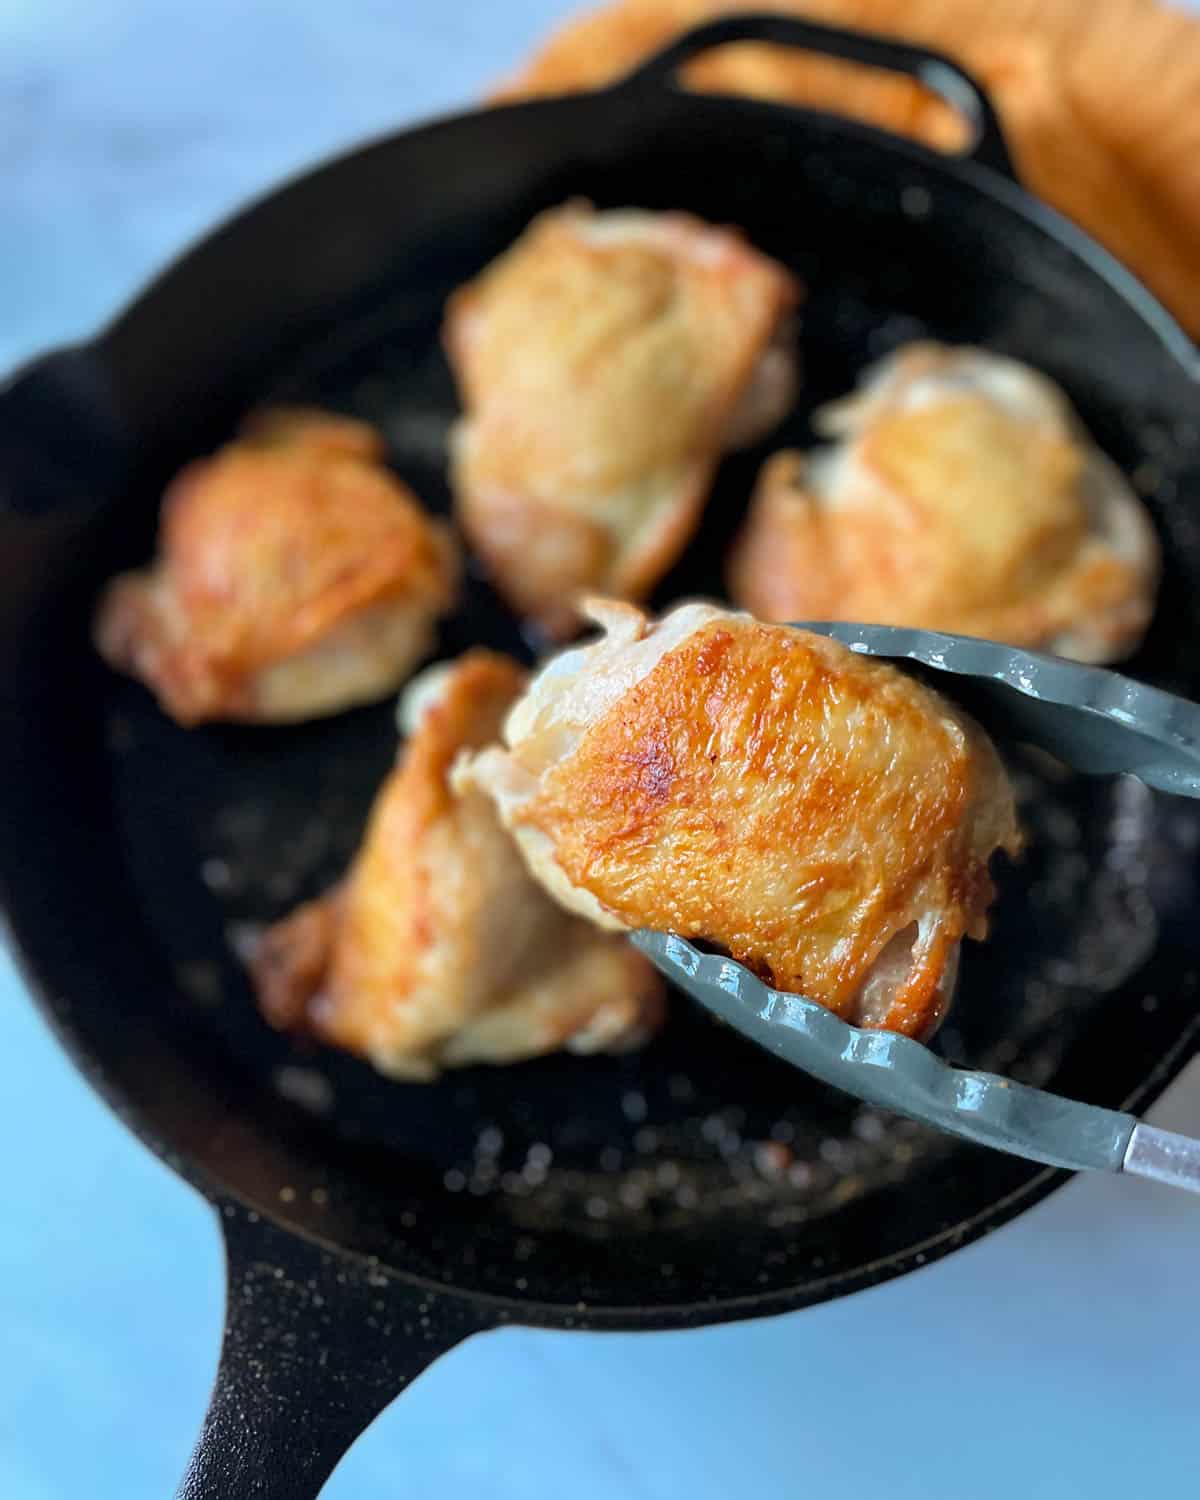 A golden brown chicken thigh is held with tongs in the foreground above a black cast iron pan of chicken thighs.